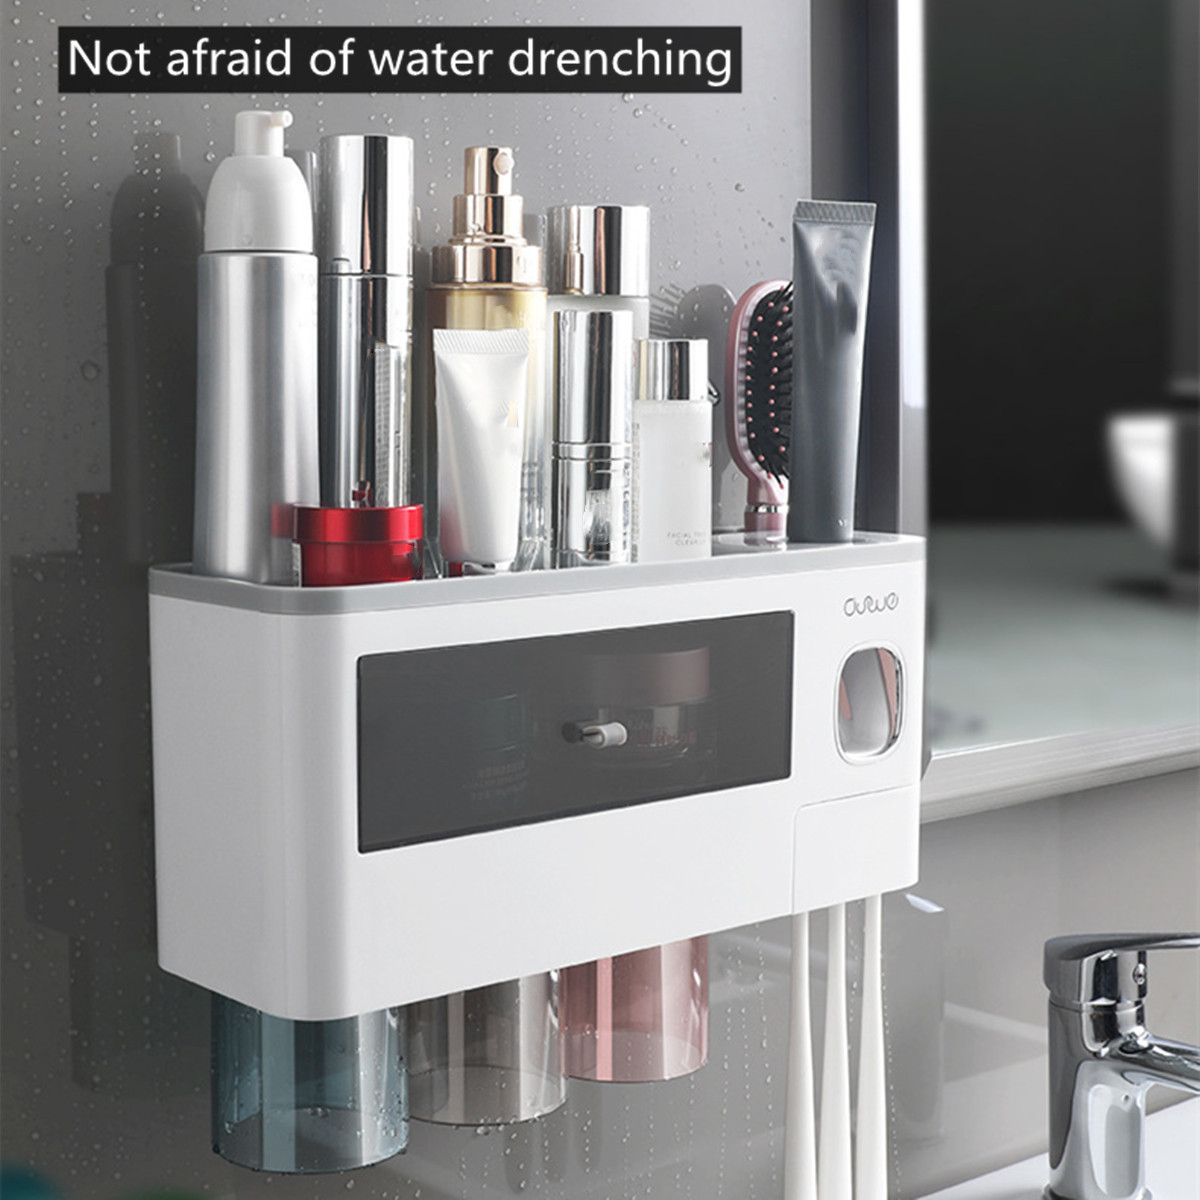 234-Cups-Multi-function-Toothbrush-Holder-Waterproof-Anti-dust-Mouth-Cup-Rack-Wall-mounted-Toothbrus-1924780-2